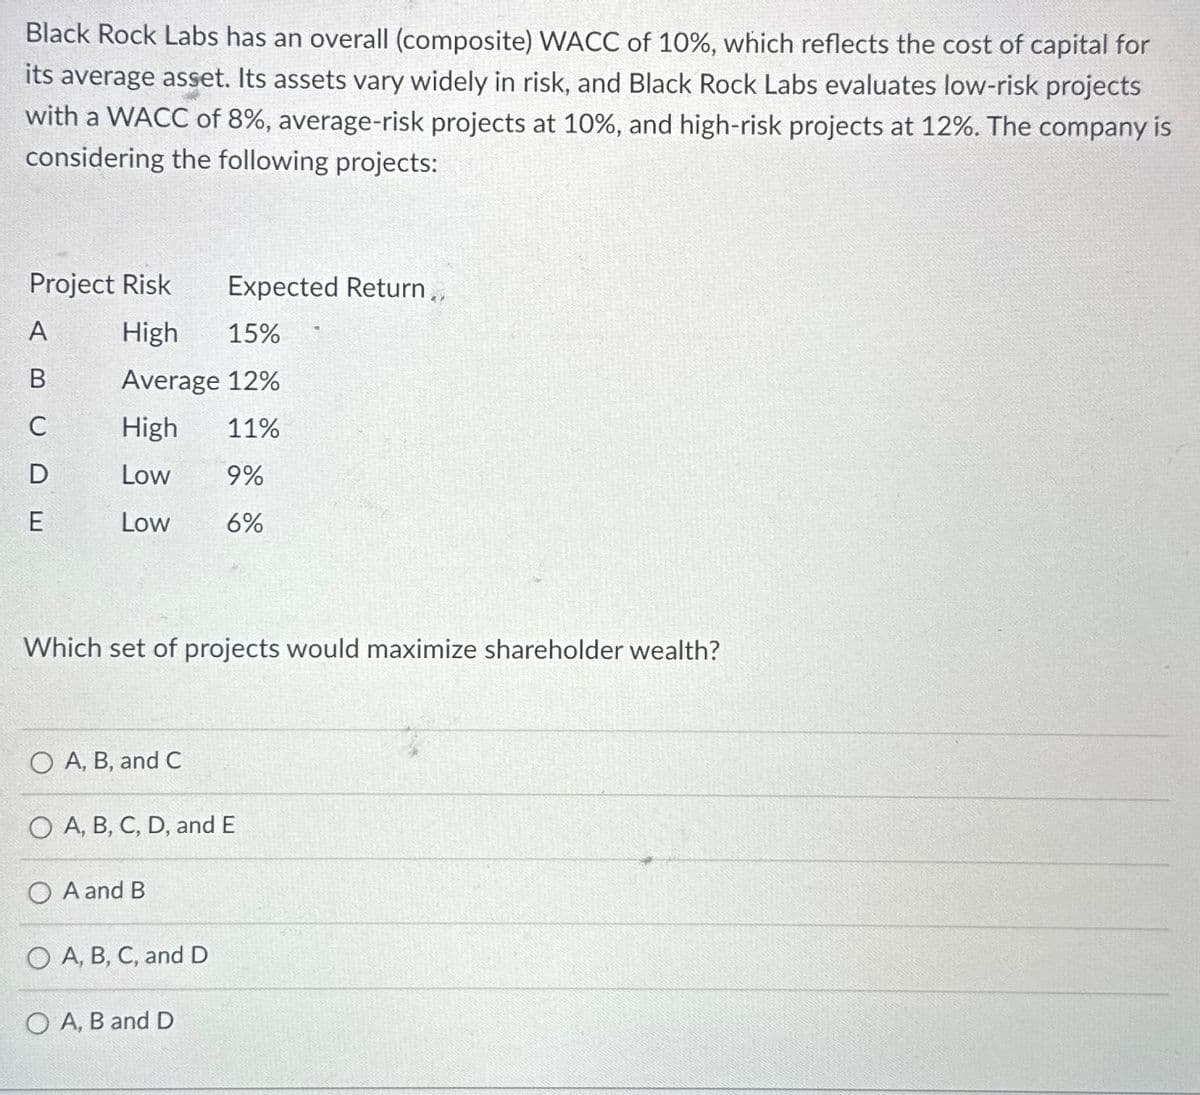 Black Rock Labs has an overall (composite) WACC of 10%, which reflects the cost of capital for
its average asset. Its assets vary widely in risk, and Black Rock Labs evaluates low-risk projects
with a WACC of 8%, average-risk projects at 10%, and high-risk projects at 12%. The company is
considering the following projects:
Project Risk Expected Return,,
High
15%
Average 12%
High 11%
Low
9%
Low 6%
A
B
C
DE
Which set of projects would maximize shareholder wealth?
O A, B, and C
O A, B, C, D, and E
O A and B
O A, B, C, and D
O A, B and D